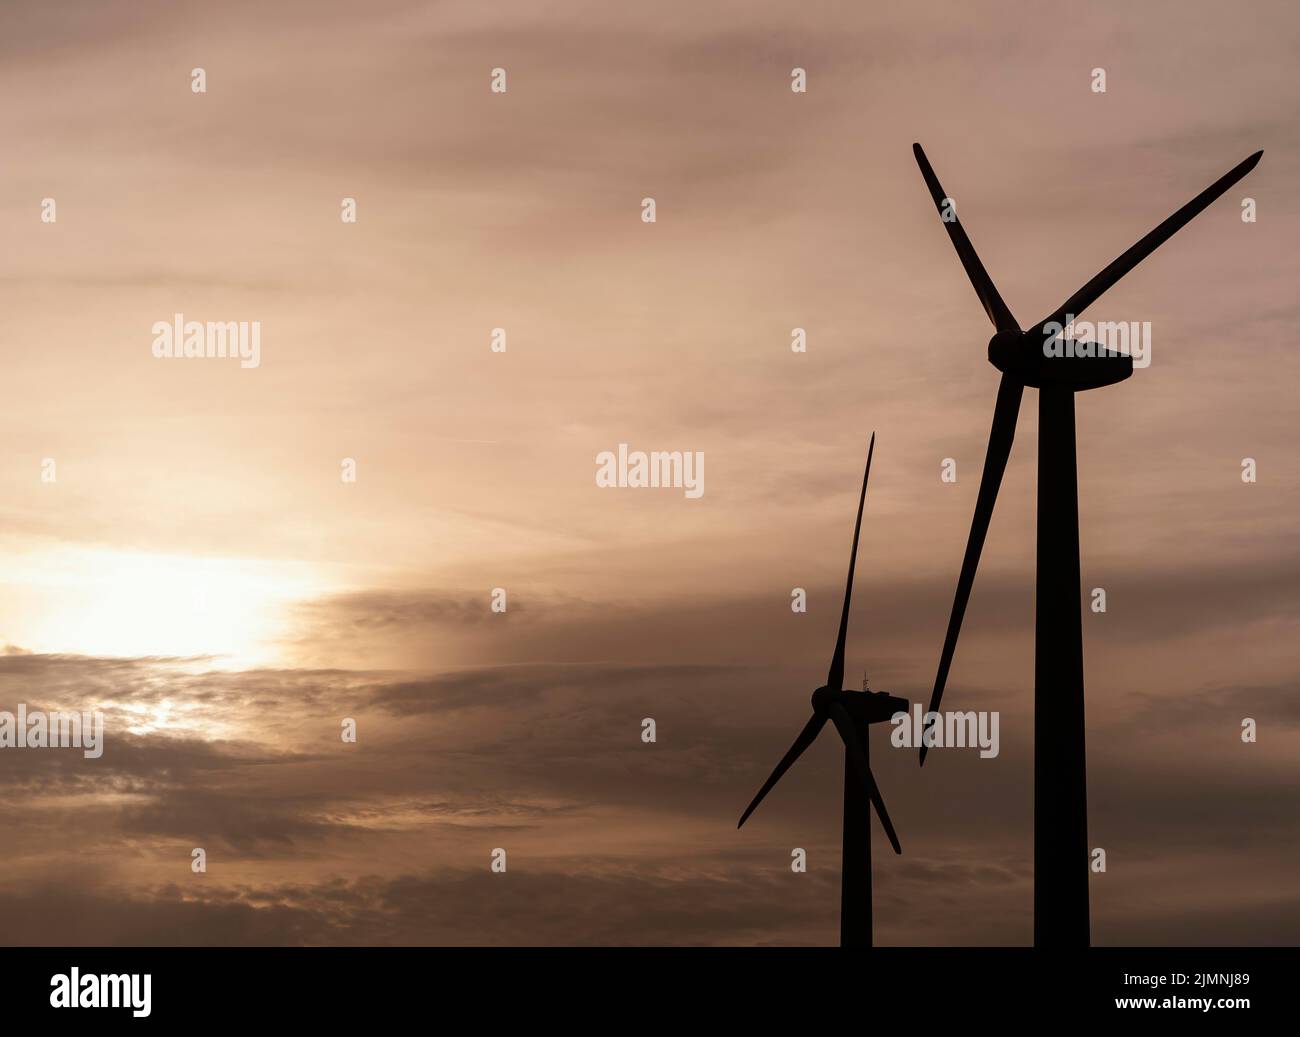 Side view wind turbine silhouette generating electricity Stock Photo